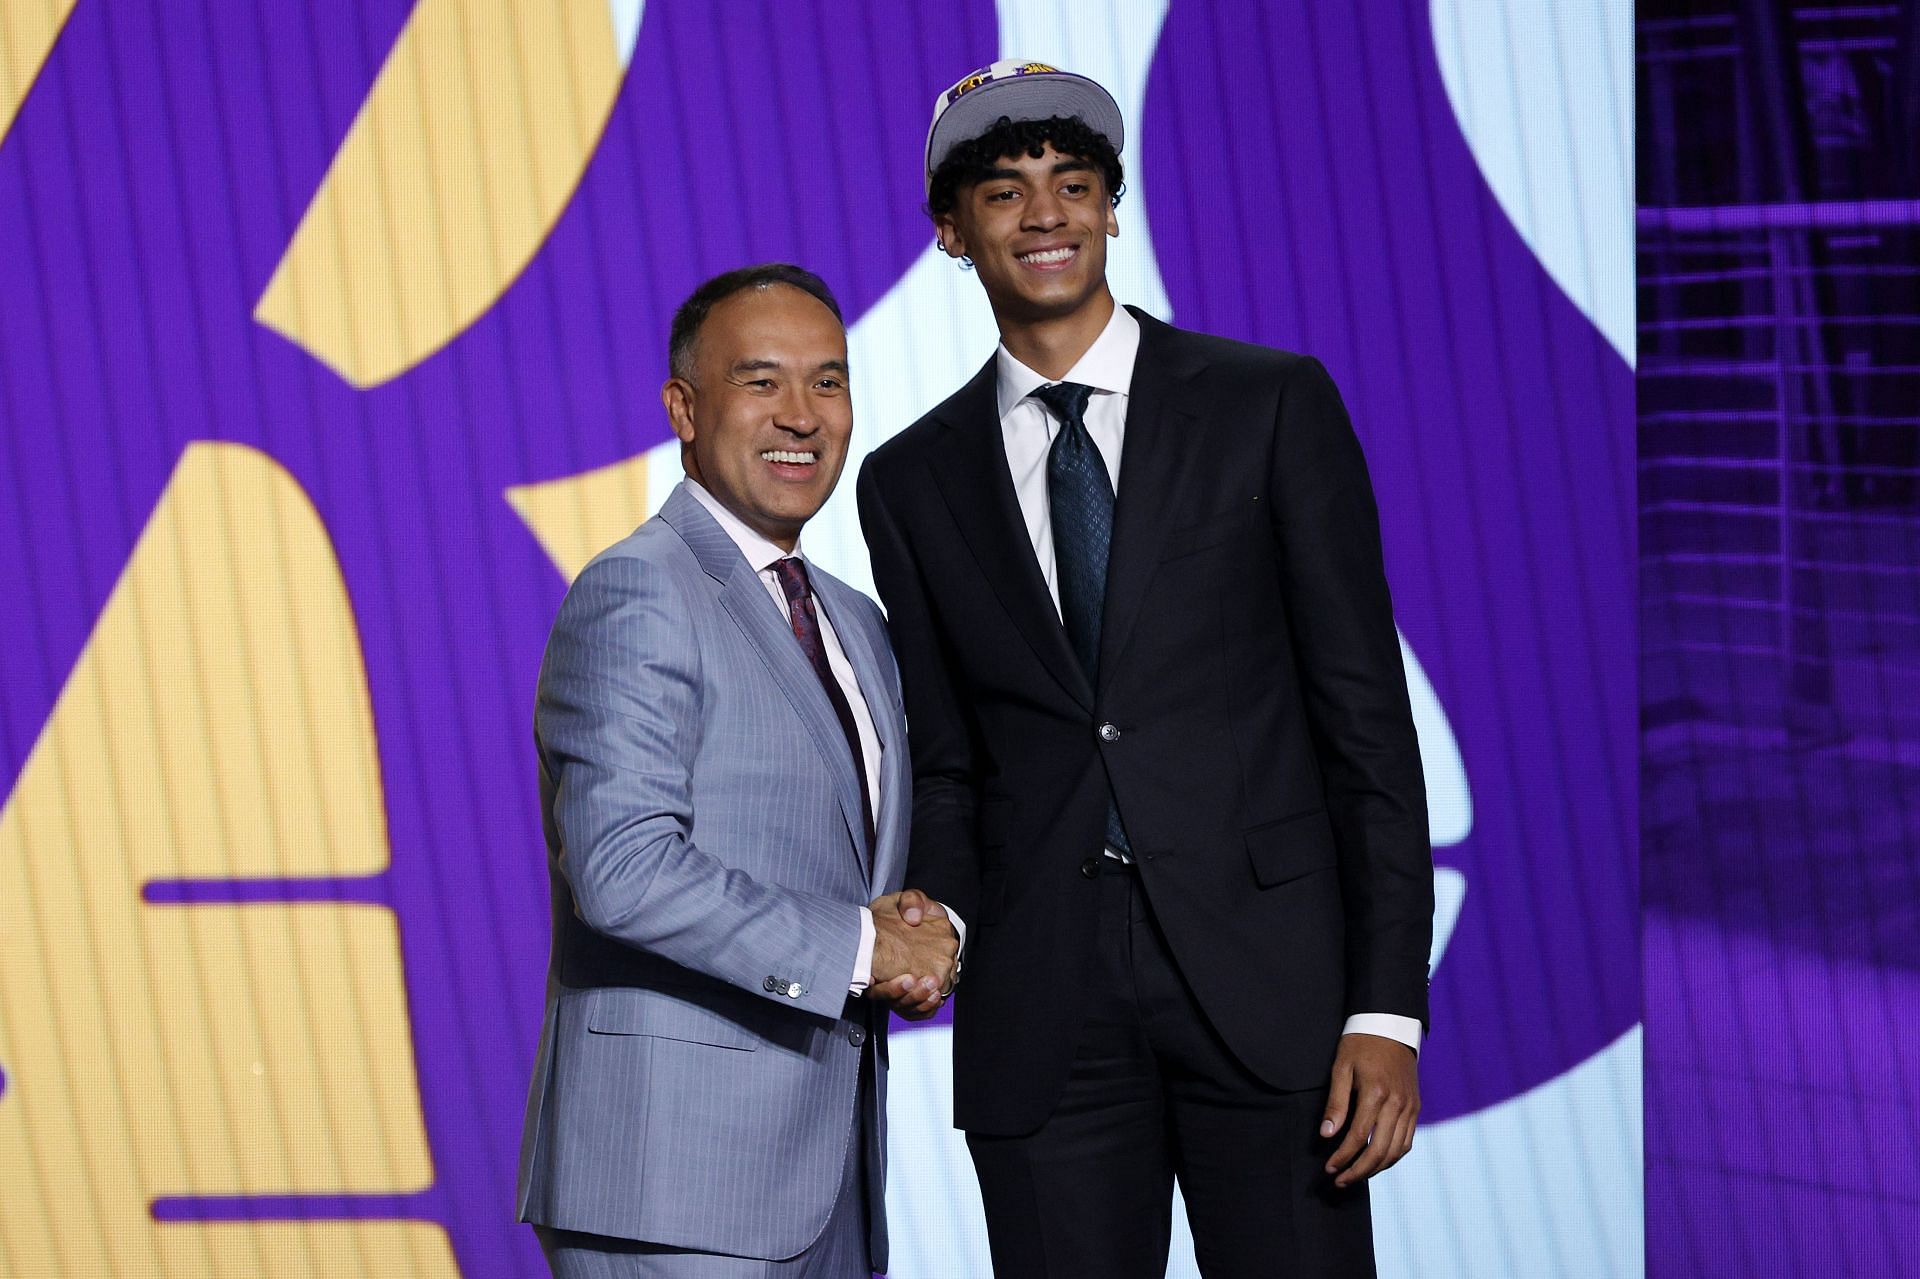 Perfect! He'll fit right in with LeBron and Westbrick!' - Skip Bayless  livid after LA Lakers draft Michigan's Max Christie in 2nd round who  apparently shot 'only 32% from 3 last season'